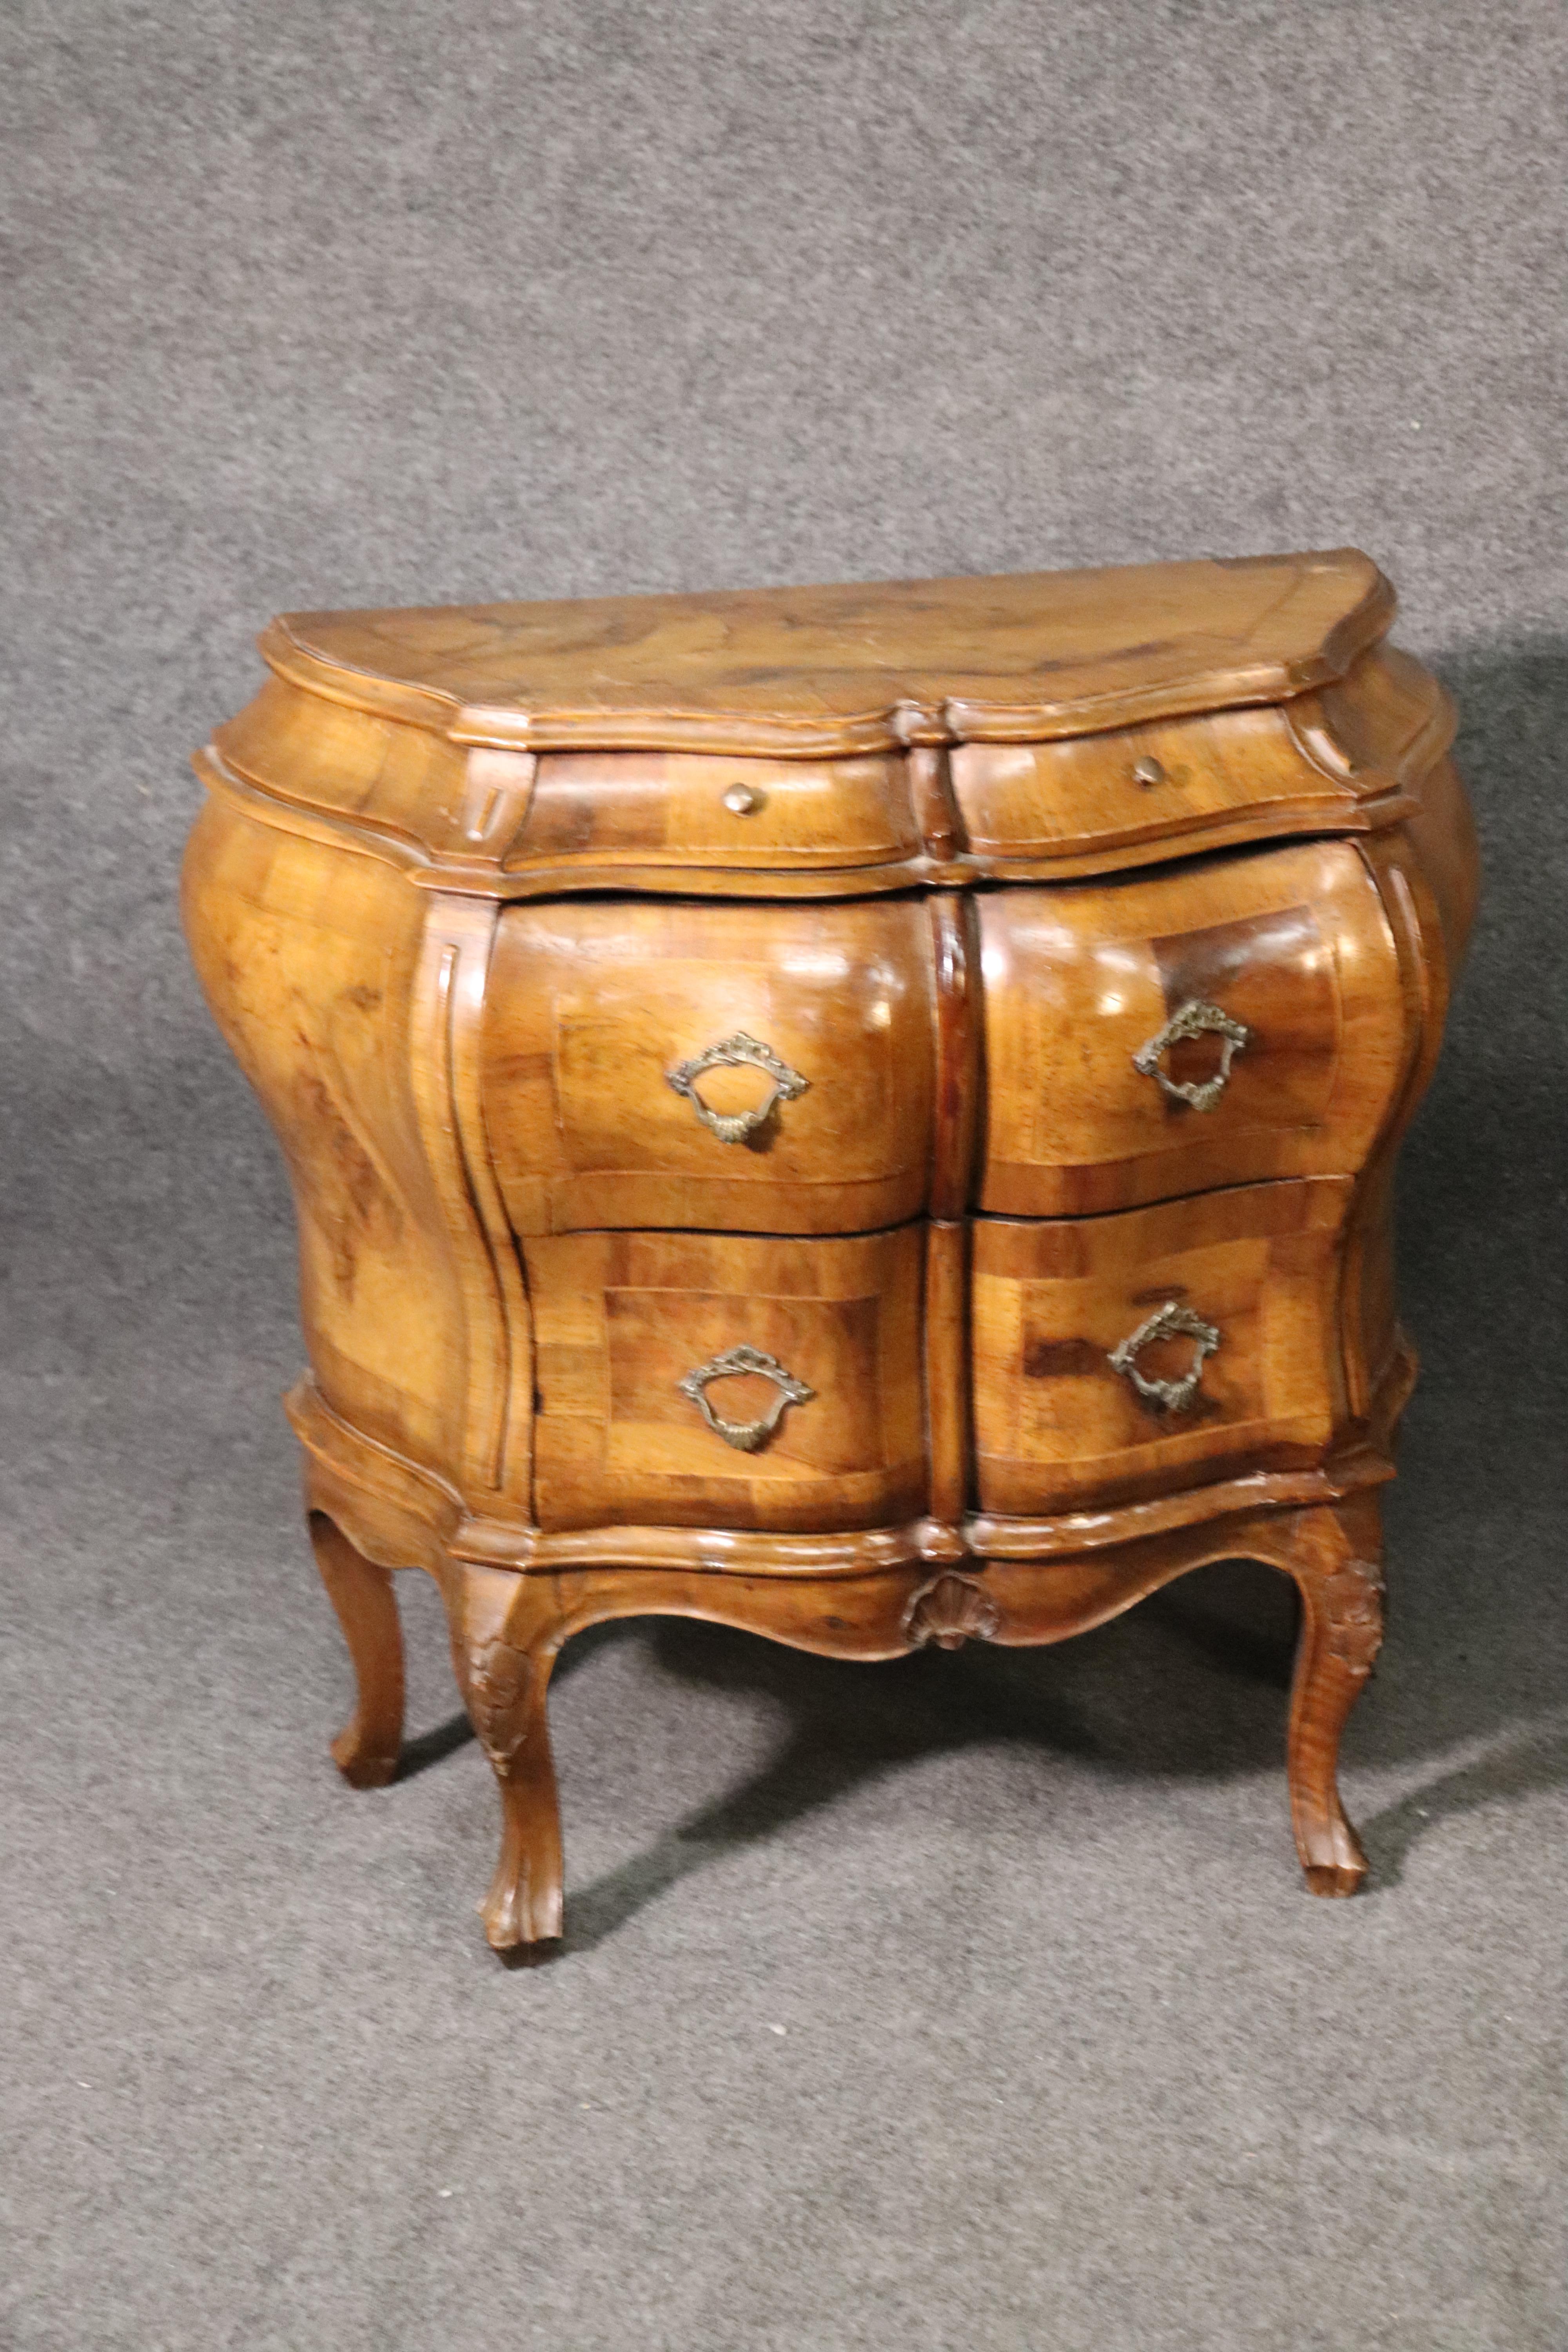 This is a beautiful pair of burled olivewood rococo style Italian commodes. The stands are beautiful and measure 27 tall x 29 wide x 14 deep. The stands can be used in many ways and not just as nightstands.